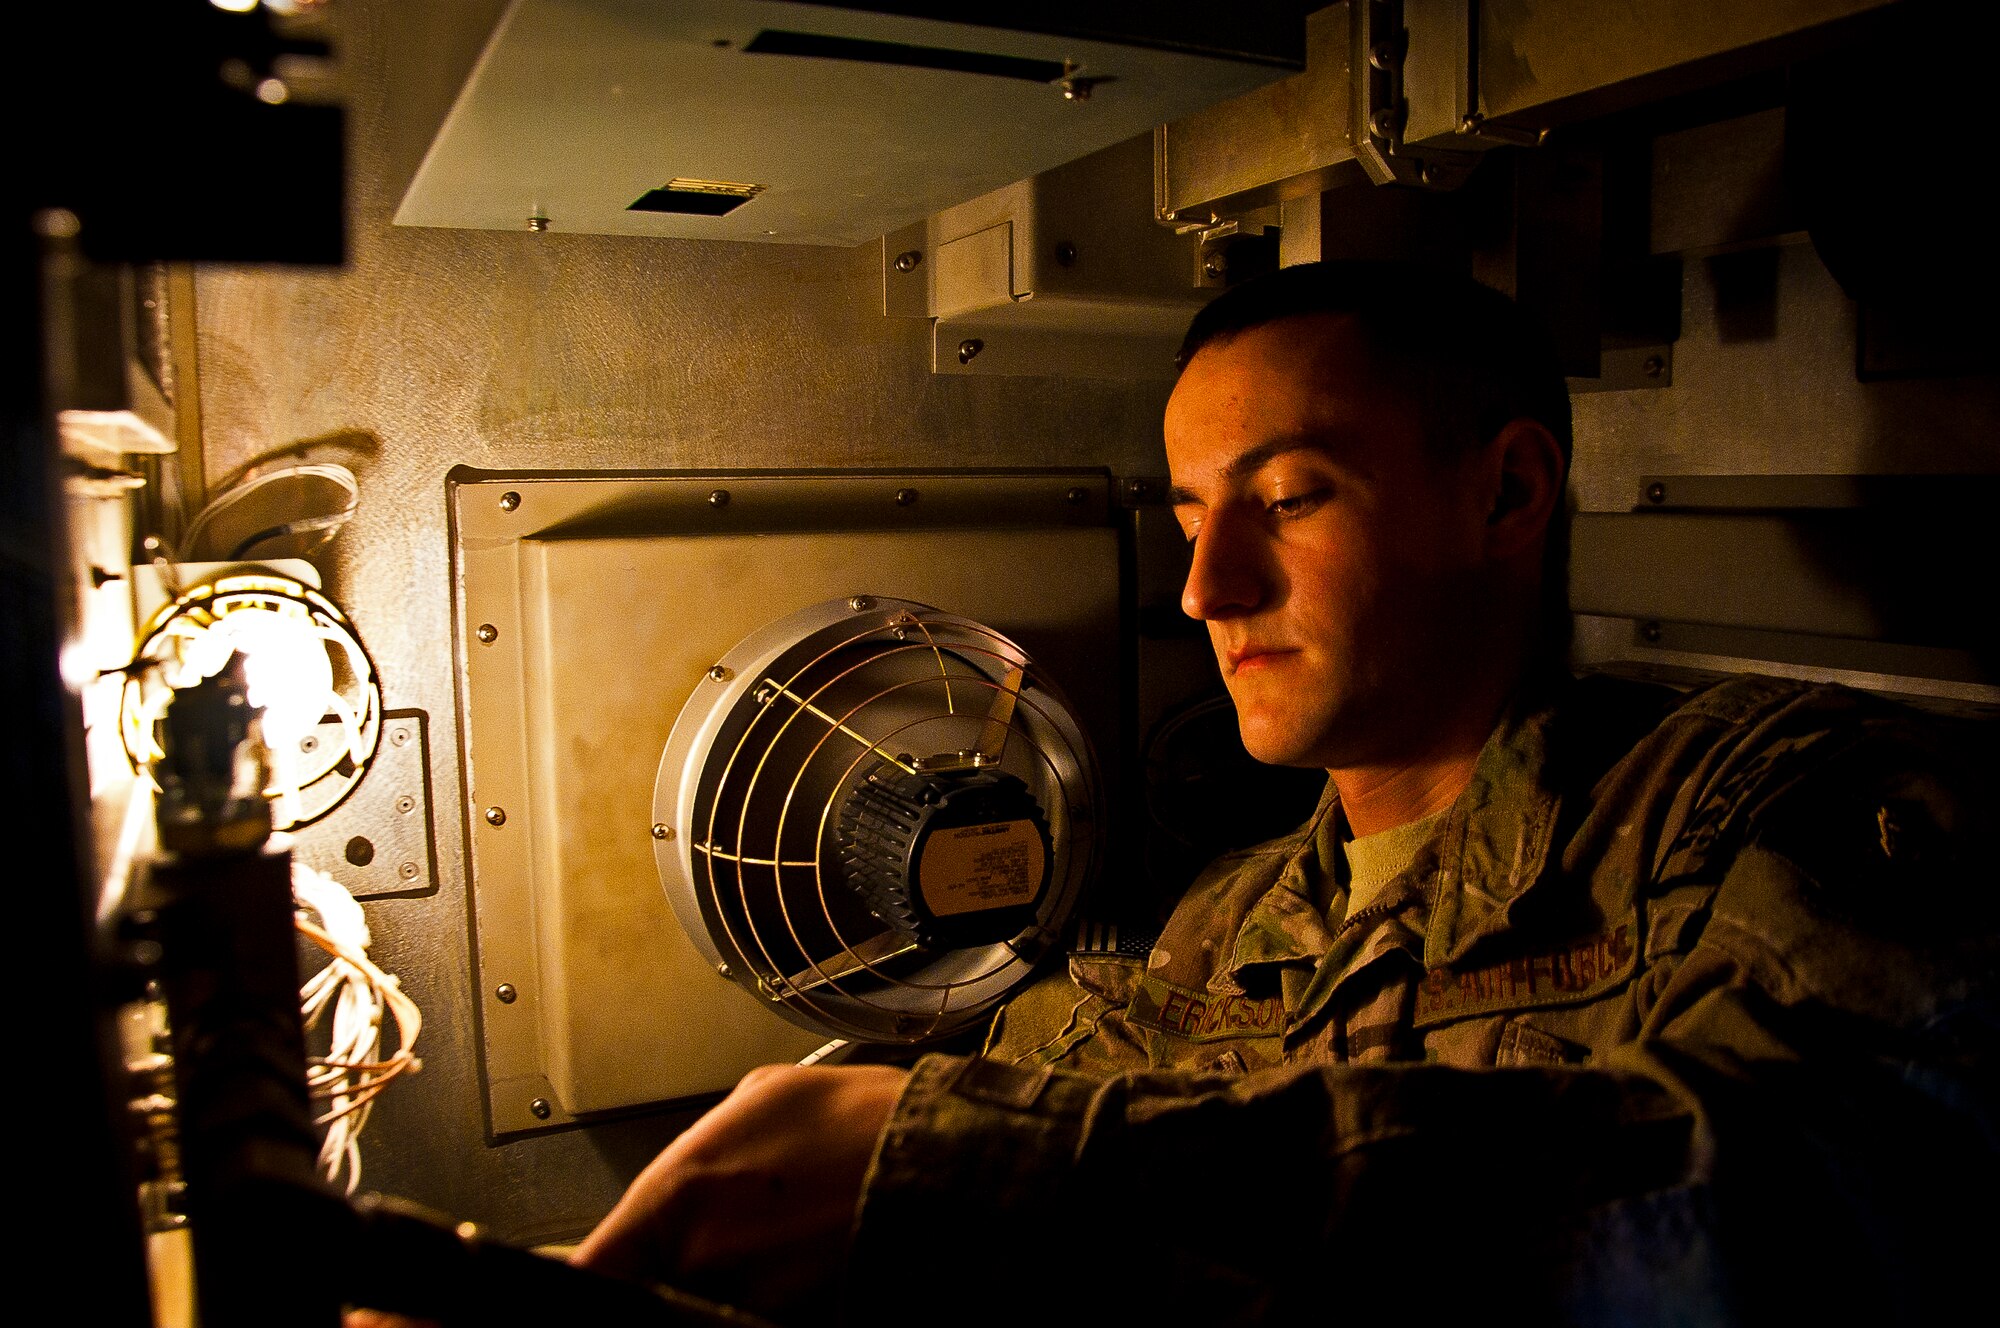 Airman 1st Class Zachary Erickson, 73rd Expeditionary Air Control Squadron, goes through a checklist of preventative maintenance at Kandahar Airfield, Afghanistan, March 13, 2012. The EACS supports the enduring airpower mission through air control and data support by making sure a constant radar feed is available from various sources throughout Afghanistan. (U.S. Air Force photo/Senior Airman Scott Saldukas)